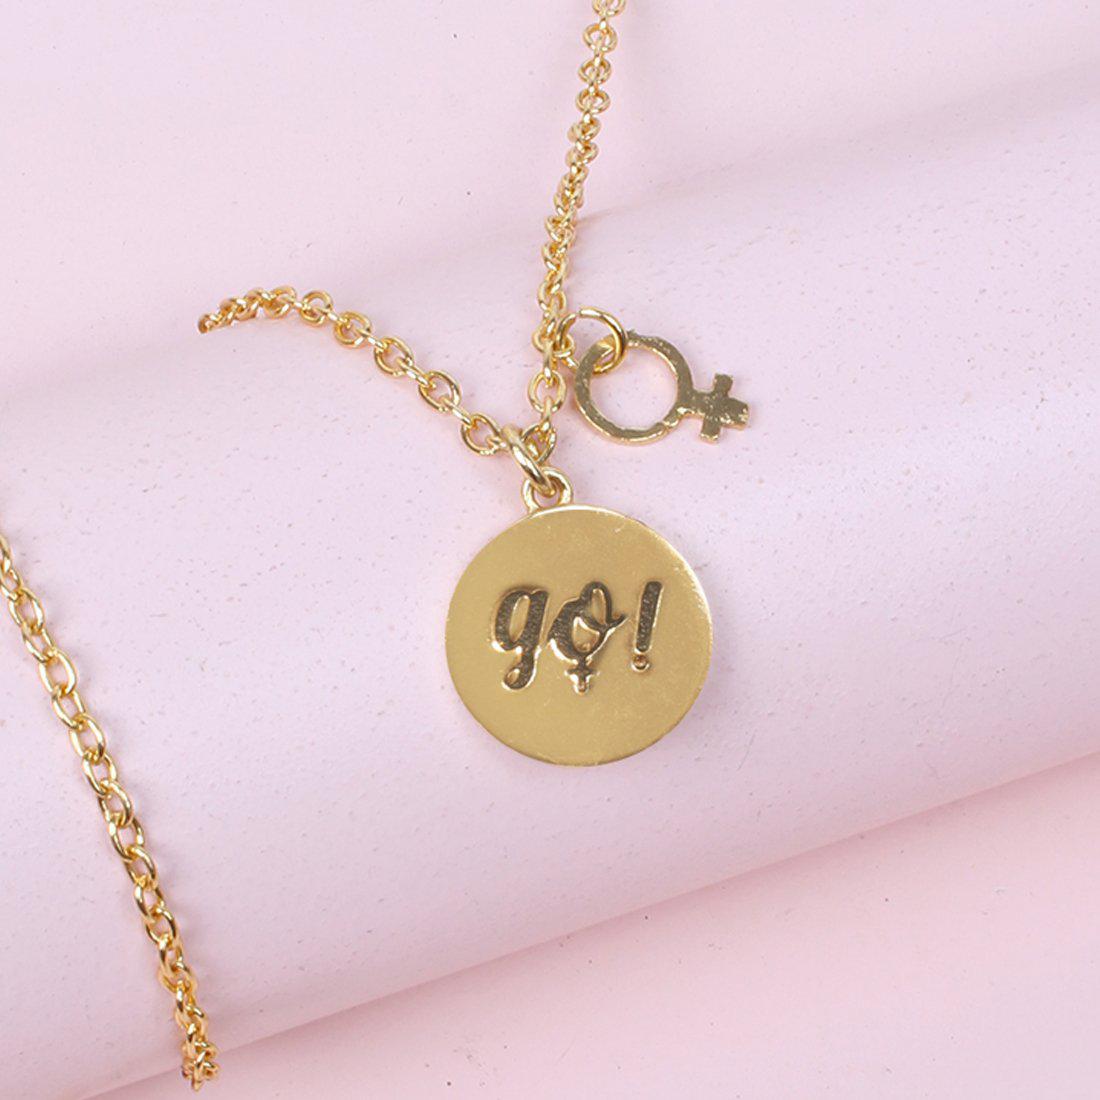 GO! CHAIN NECKLACE WITH GIRL CHARM